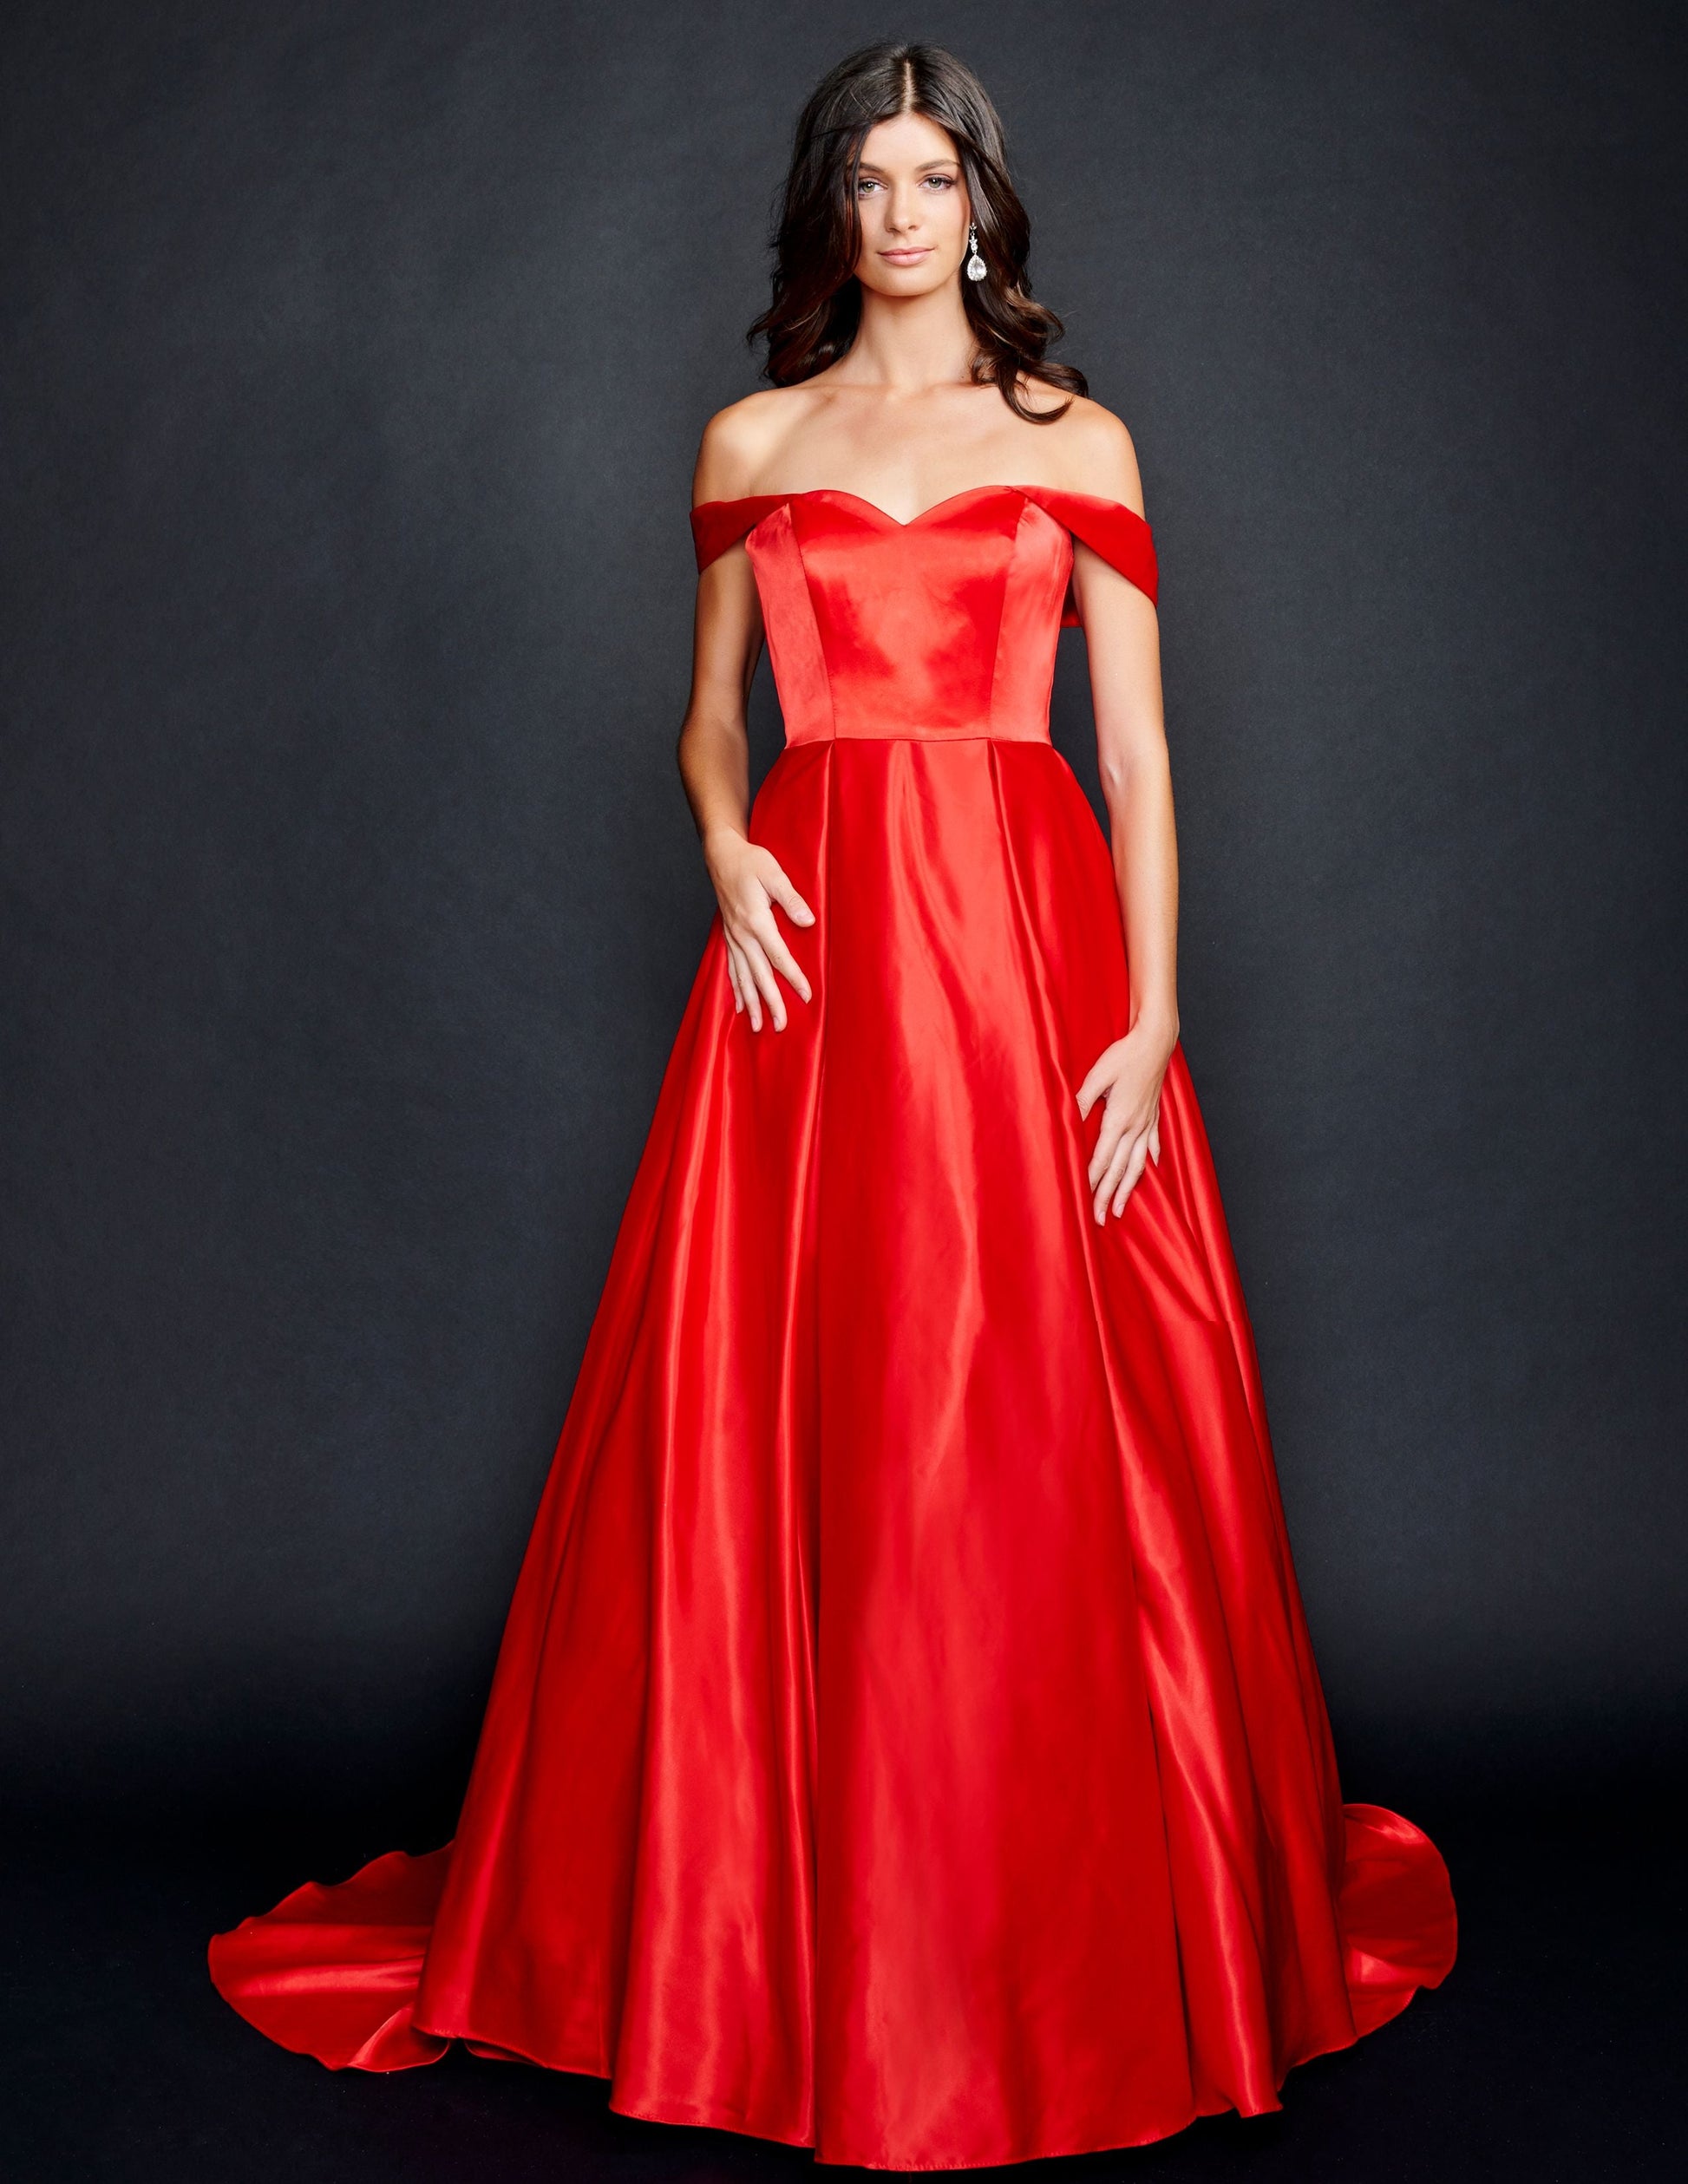 Nina Canacci 5214 Long Satin off the shoulder Ballgown Prom Dress Pageant Gown Pockets  Available Size- 4-24  Available Color-Red, Emerald 